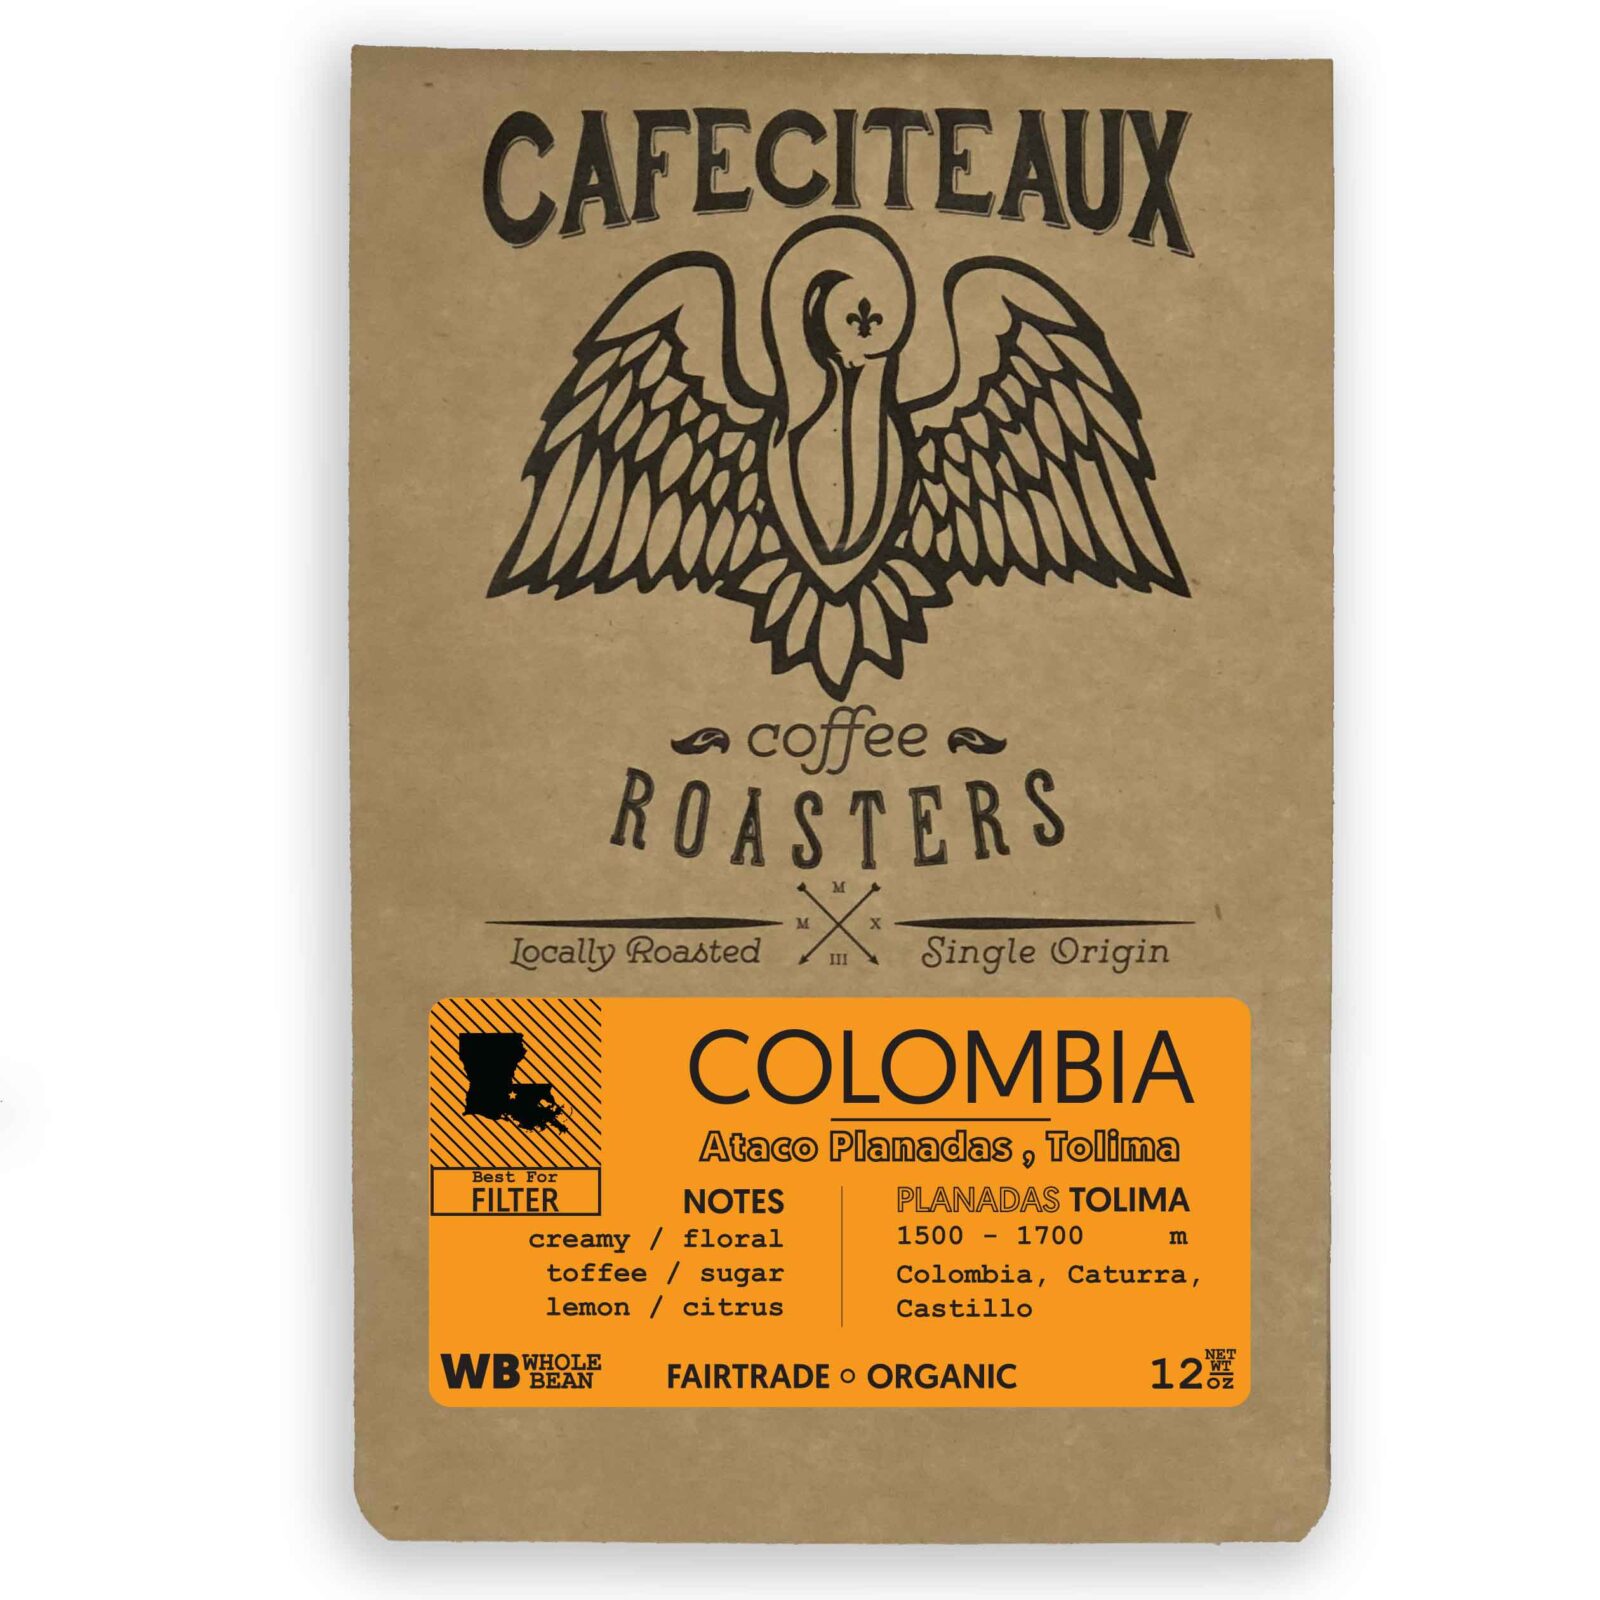 Cafeciteaux Coffee Roasters